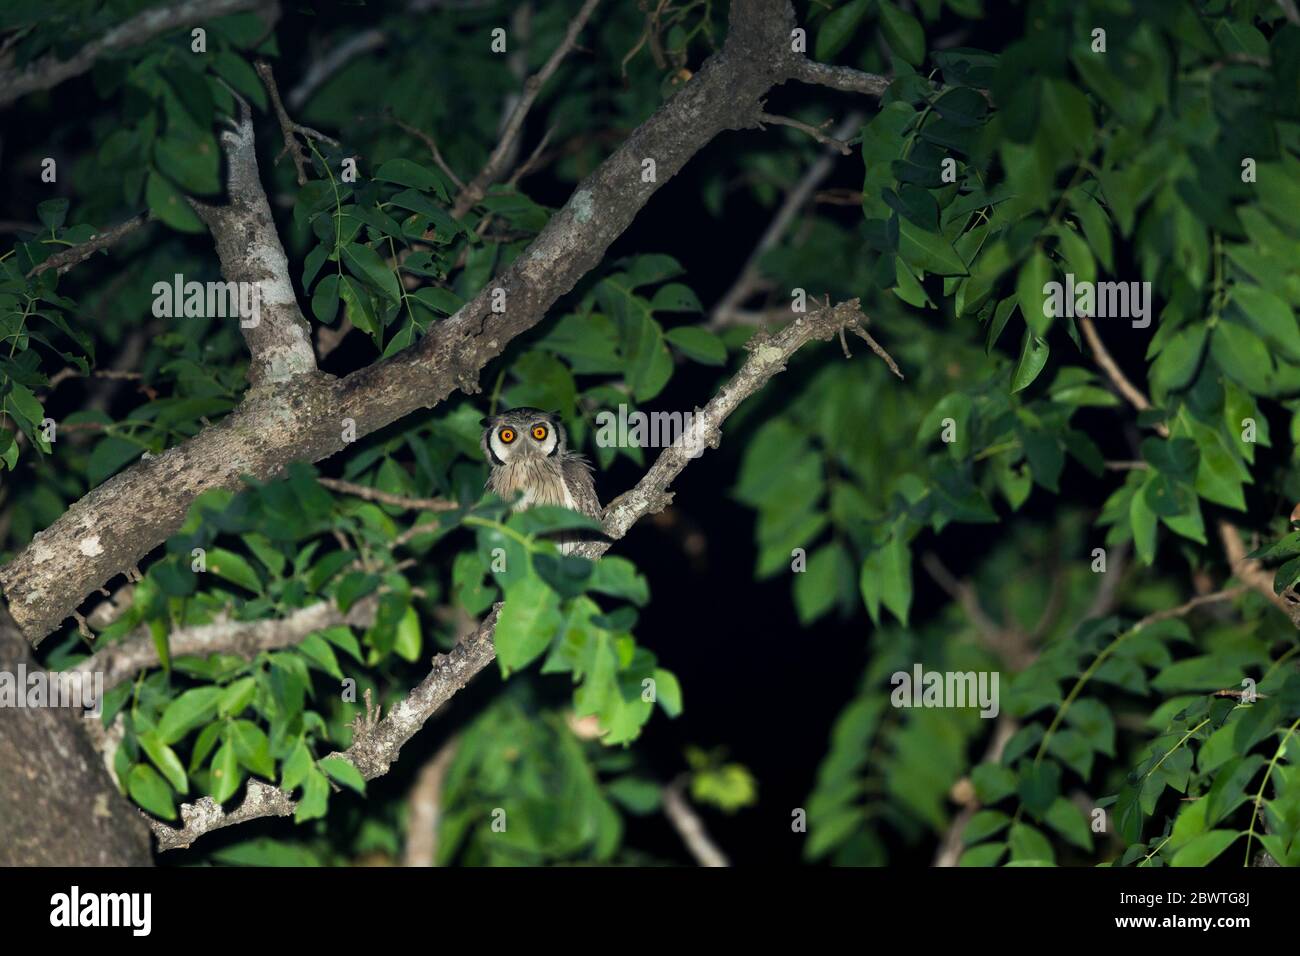 Northern white-faced owl Ptilopsis leucotis, adult, perched in tree, Mole National Park, Ghana, March Stock Photo